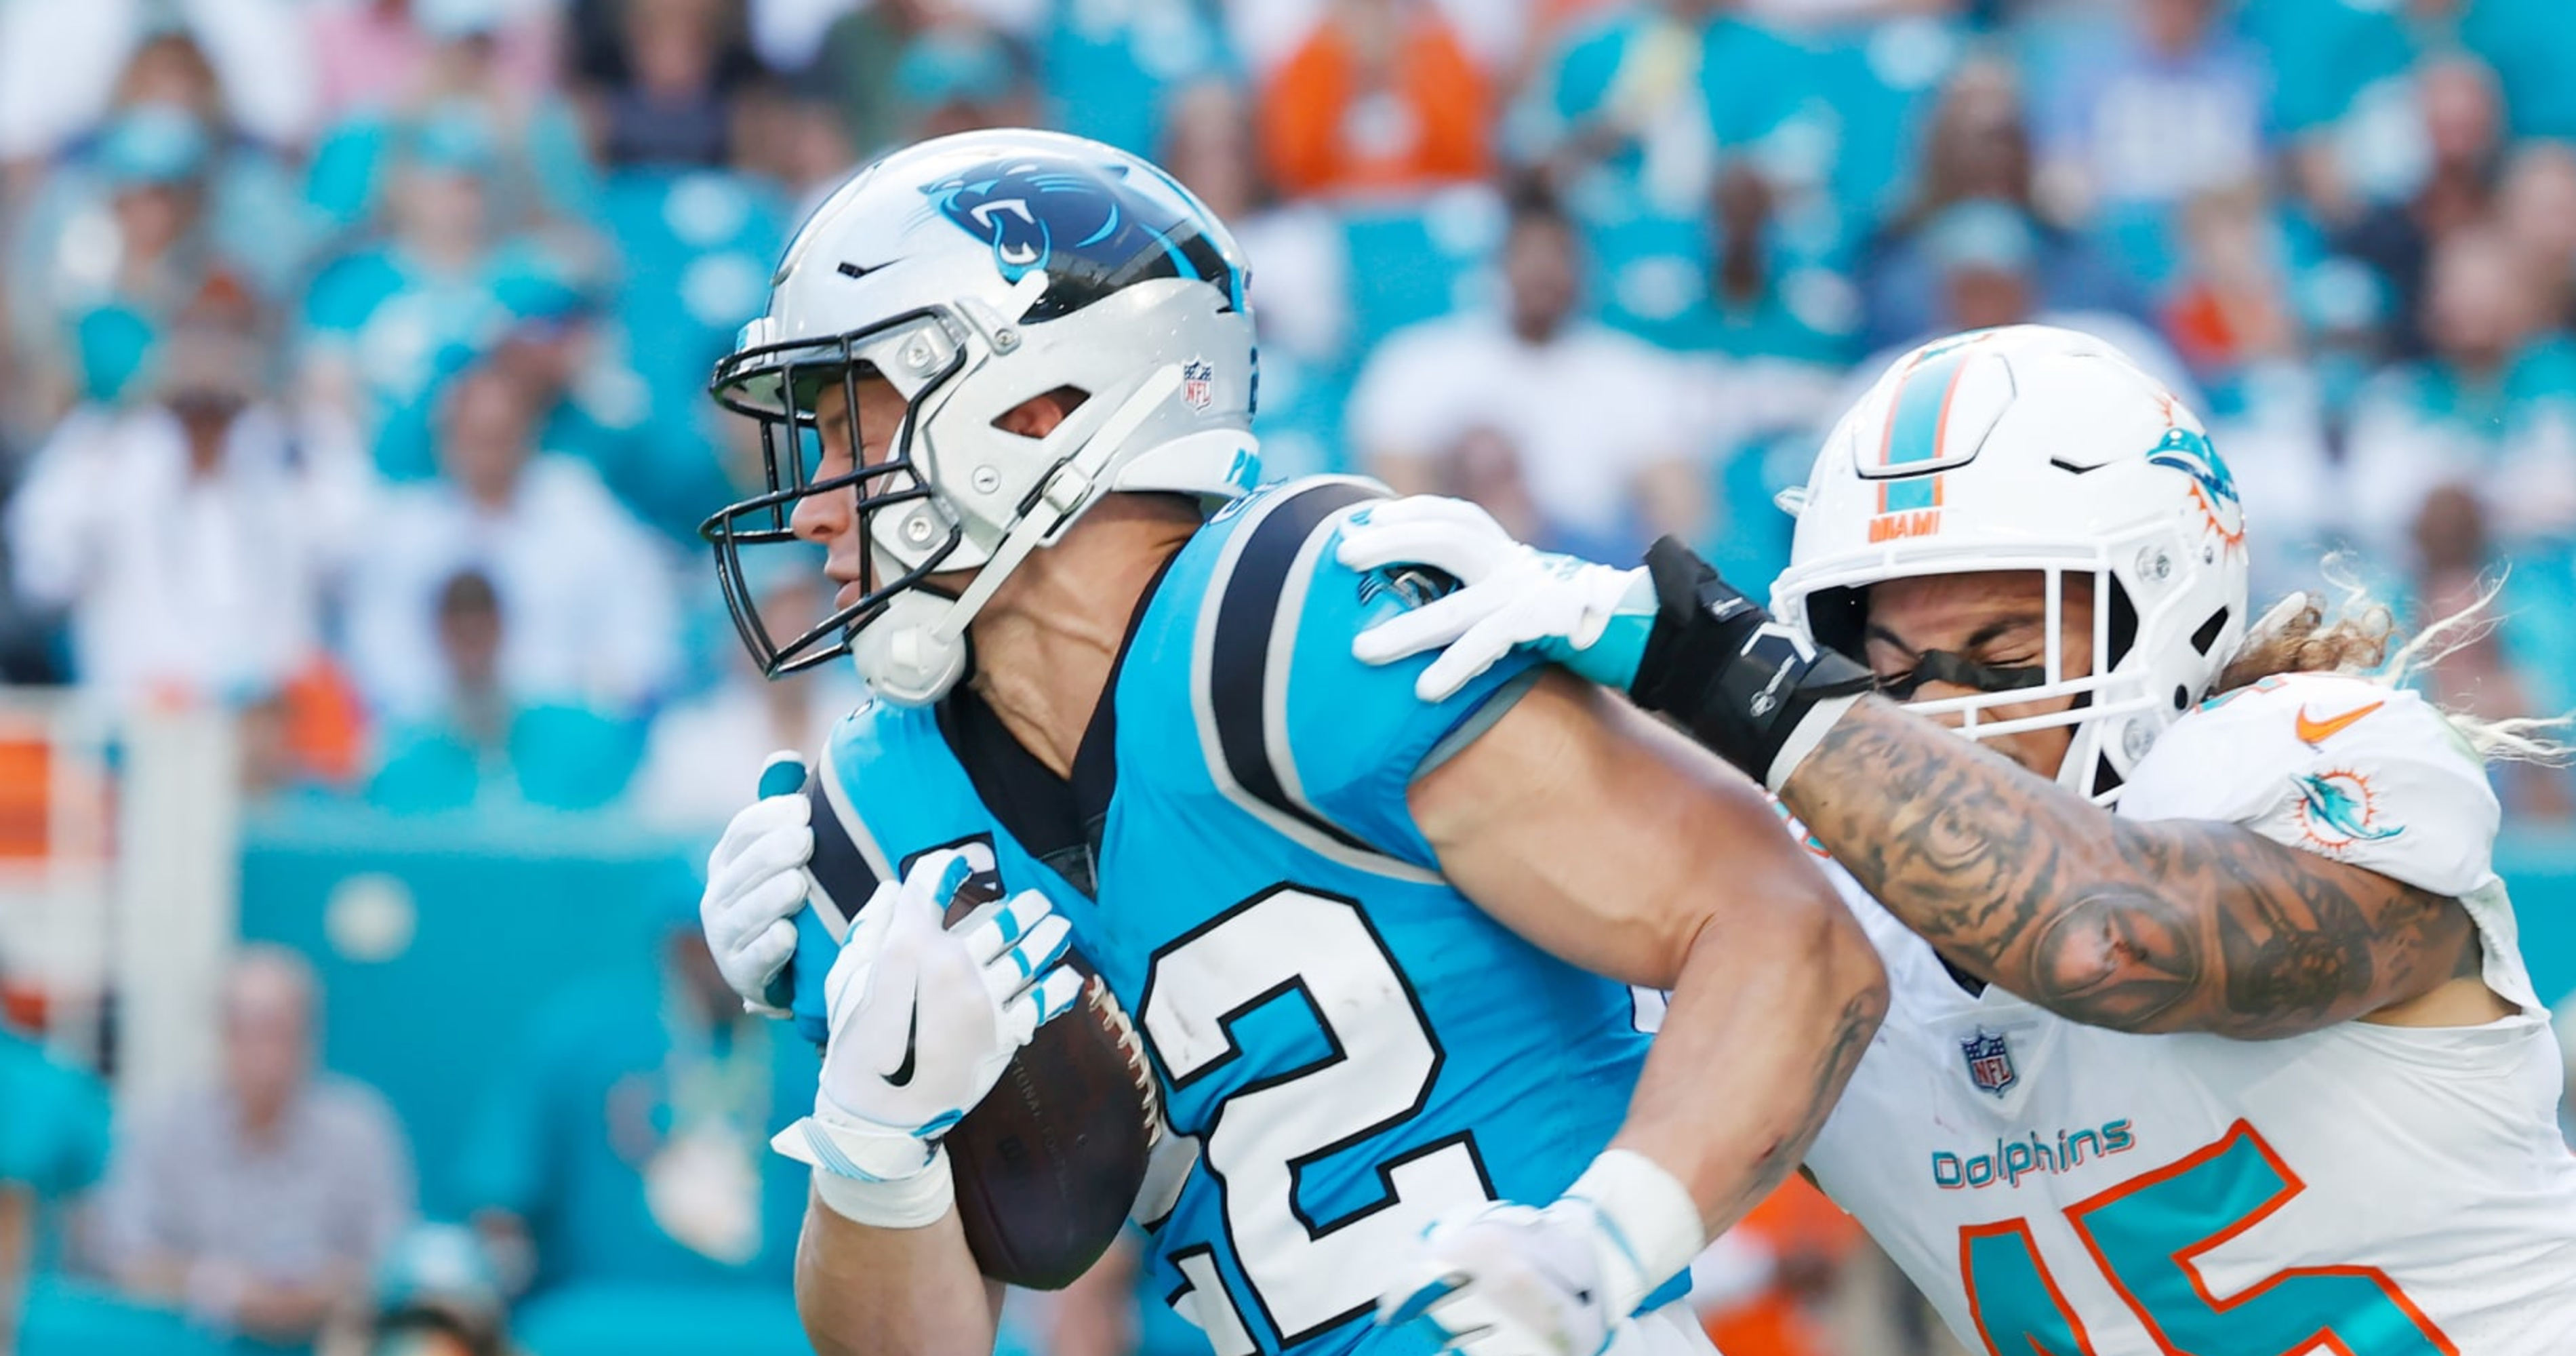 NFL Training Camp Notes, Chase Claypool Fantasy, TE Draft Strategy